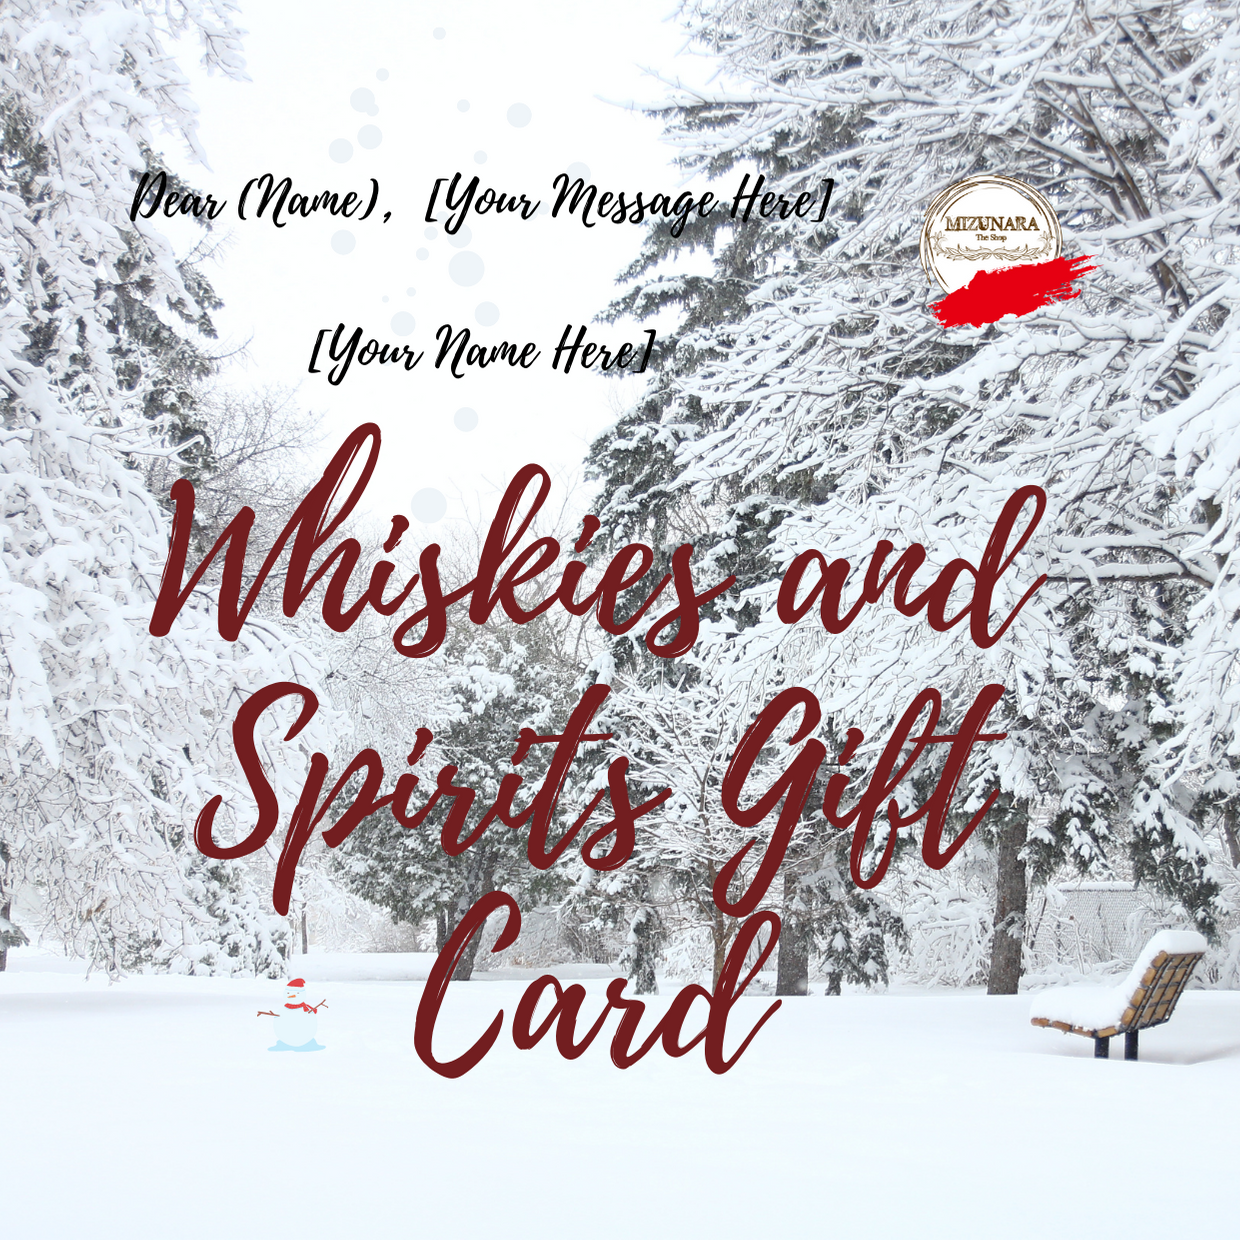 Gift a special Whisky & Spirits Gift Card to your near and dear one for this Chirstmas